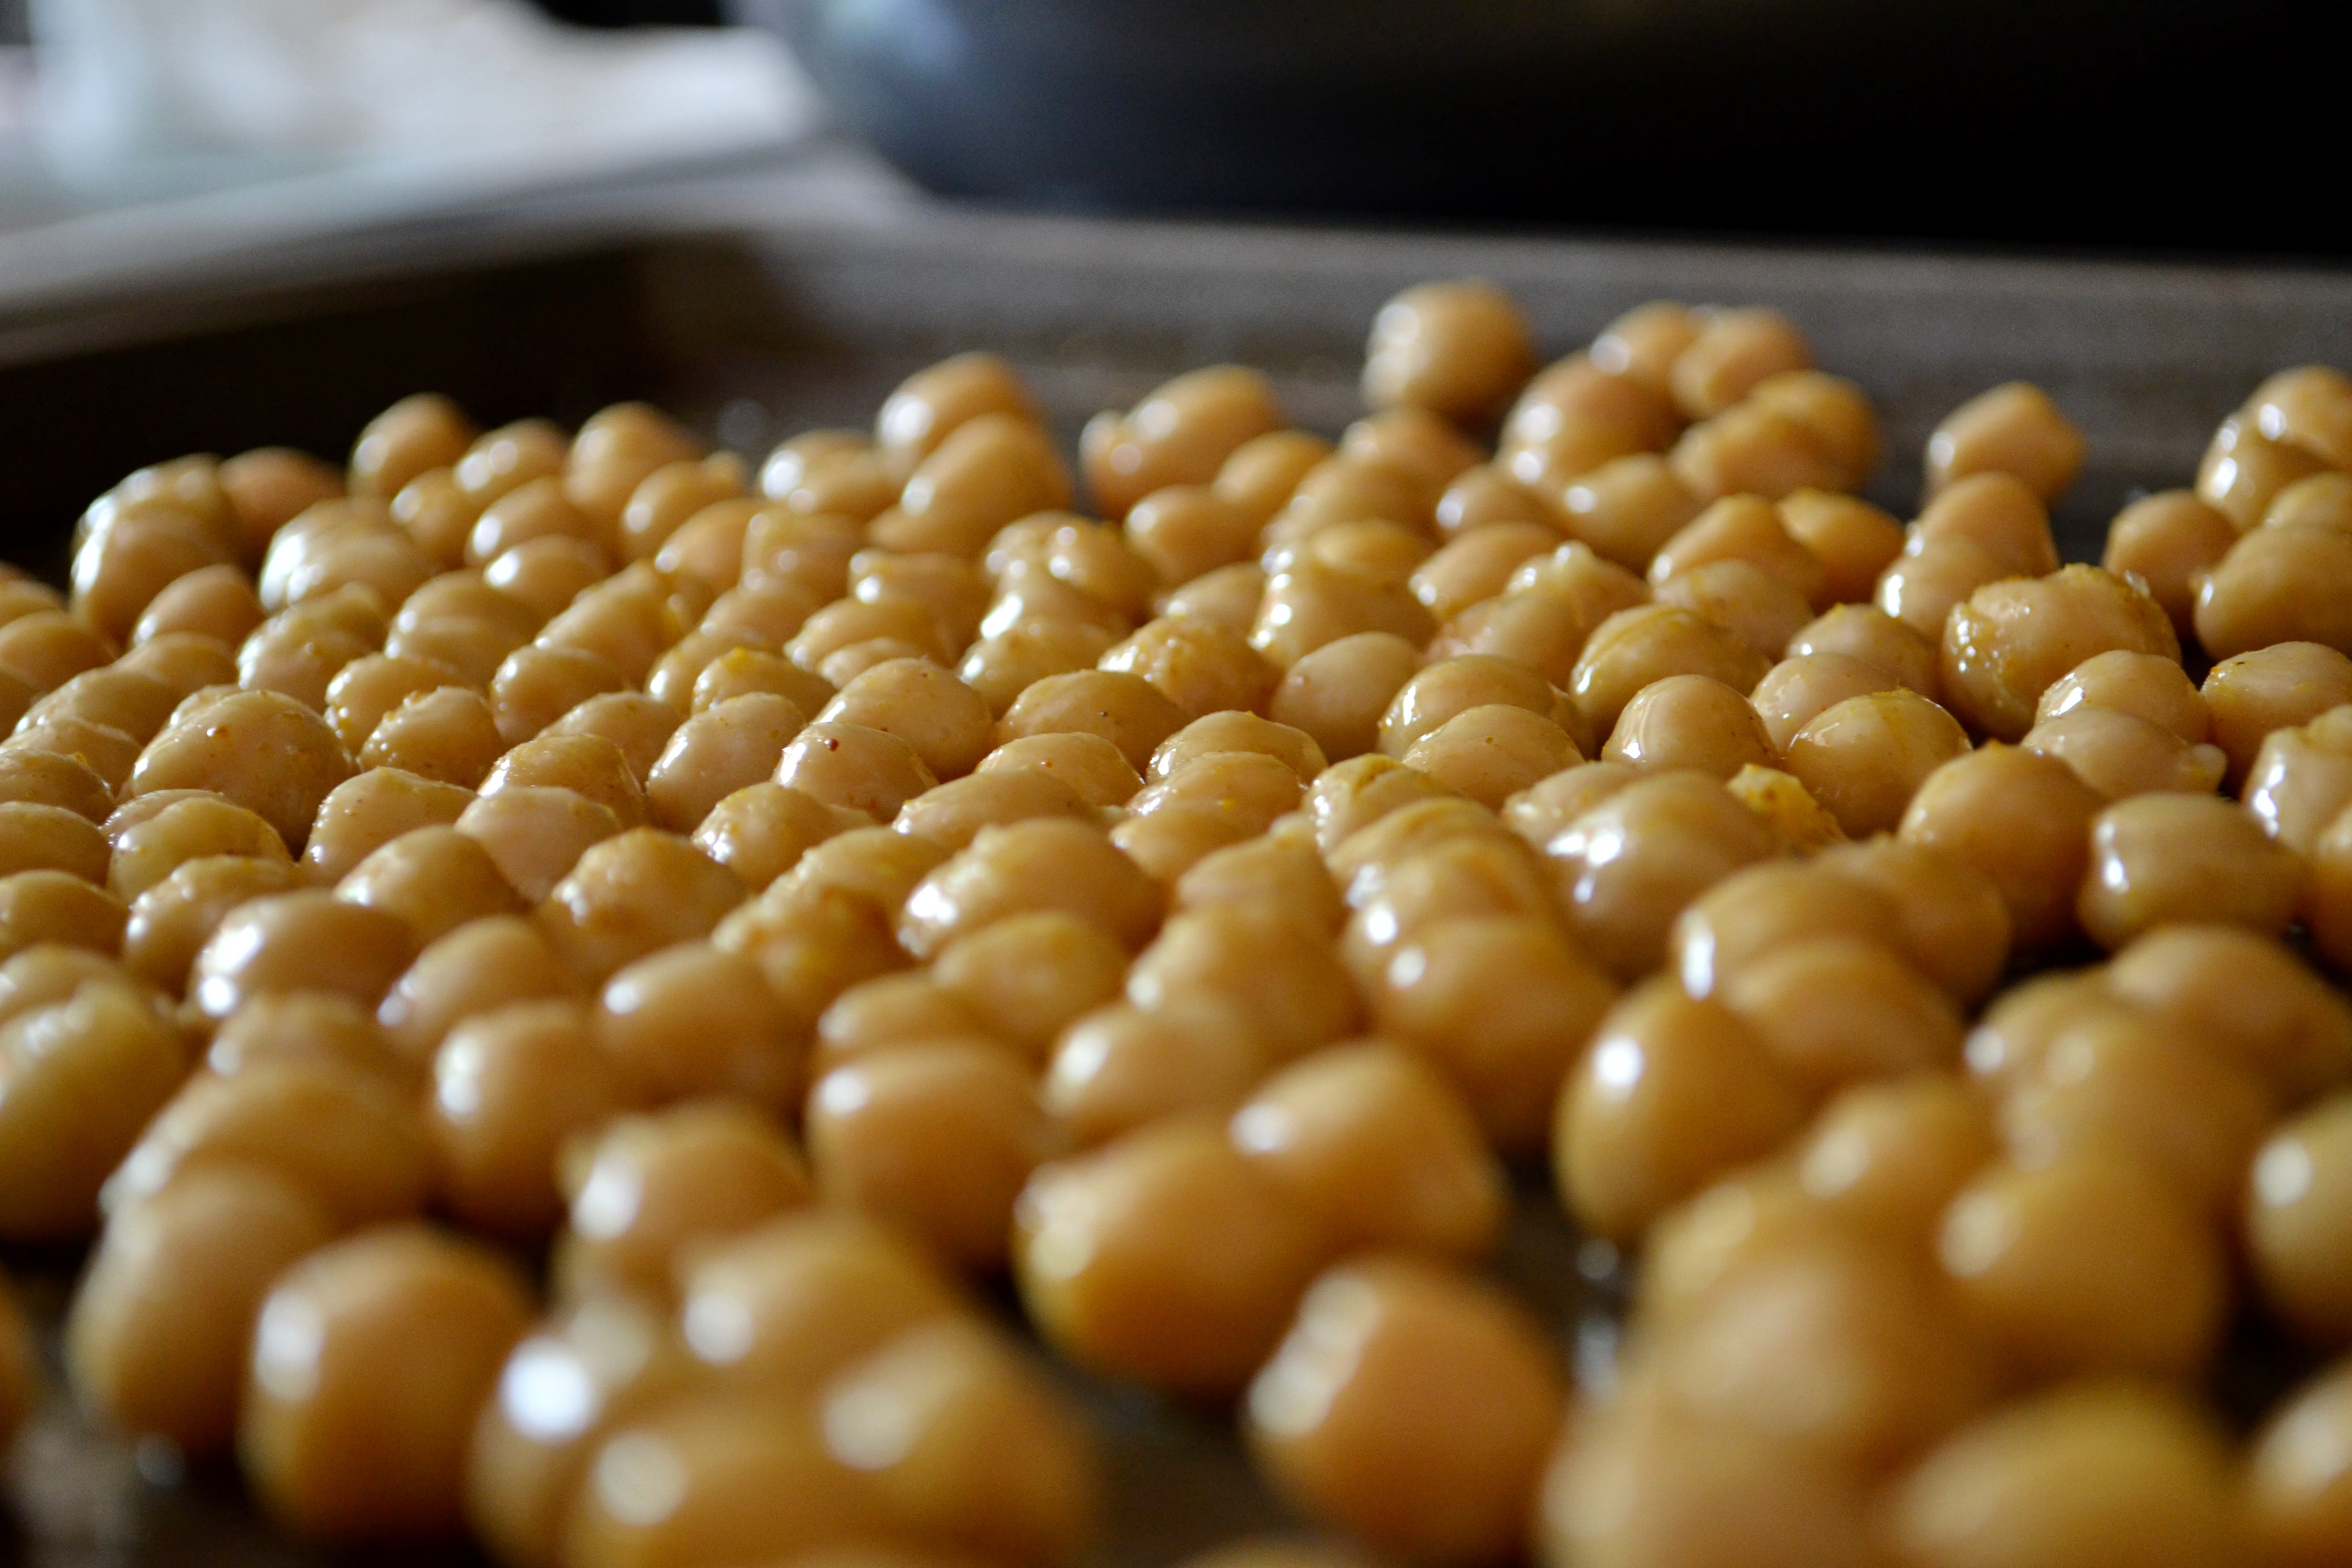 Hot Curried Roasted Chickpeas